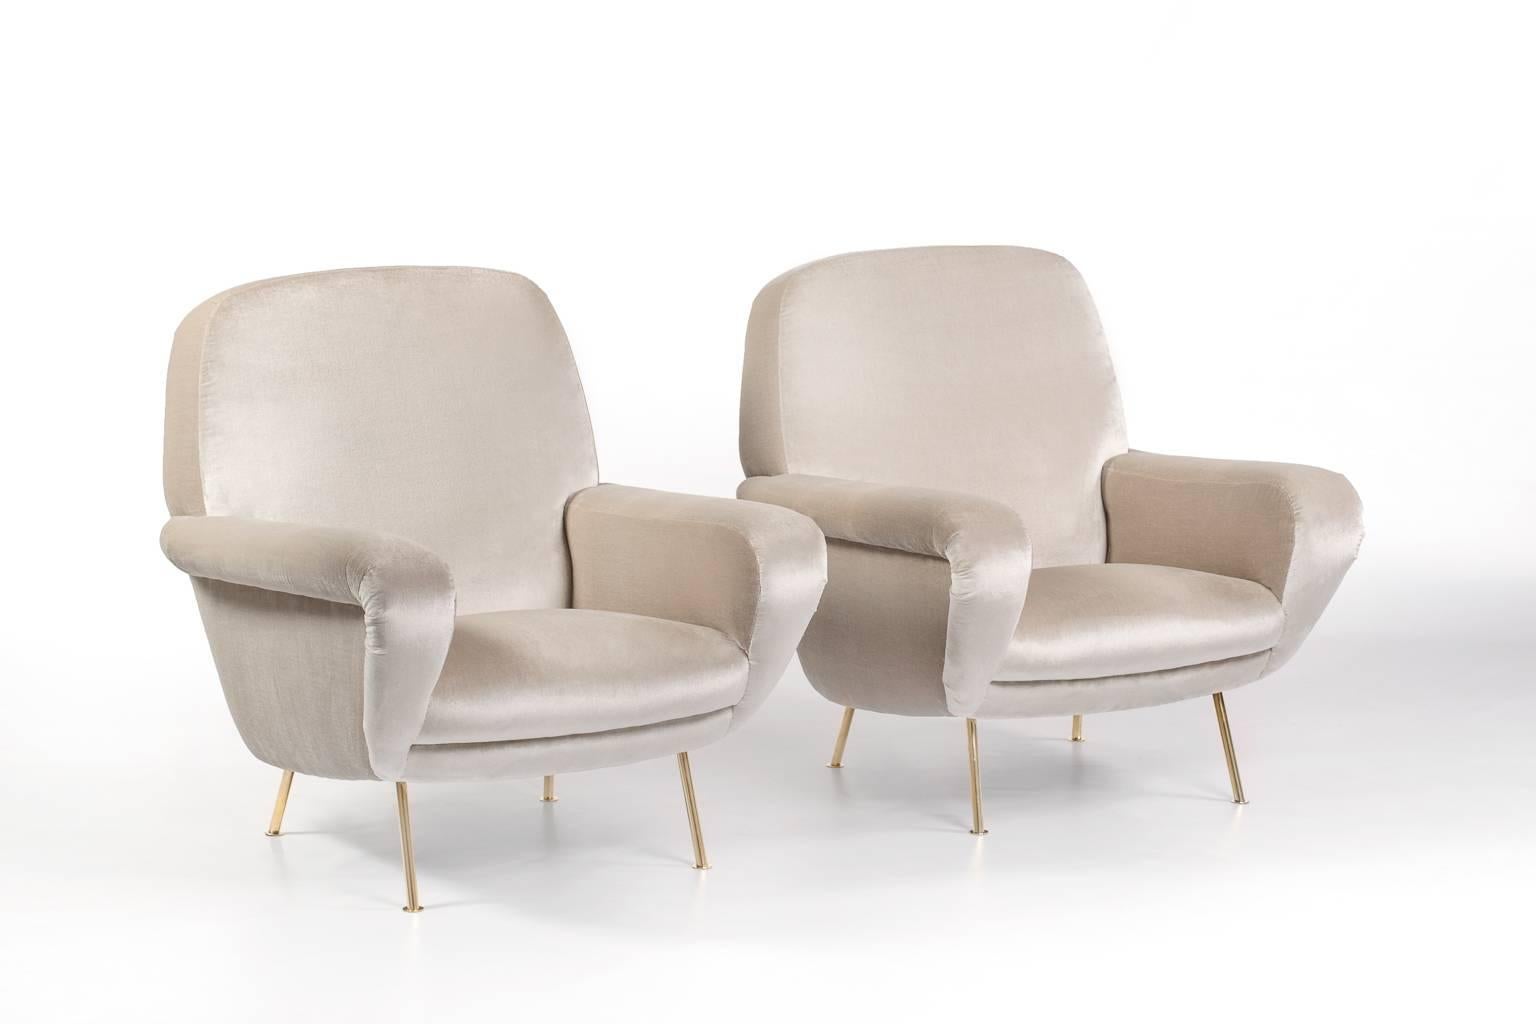 Mid-Century Modern Pair of Armchairs by Gianfranco Frattini for Cassina, Italy, 1954